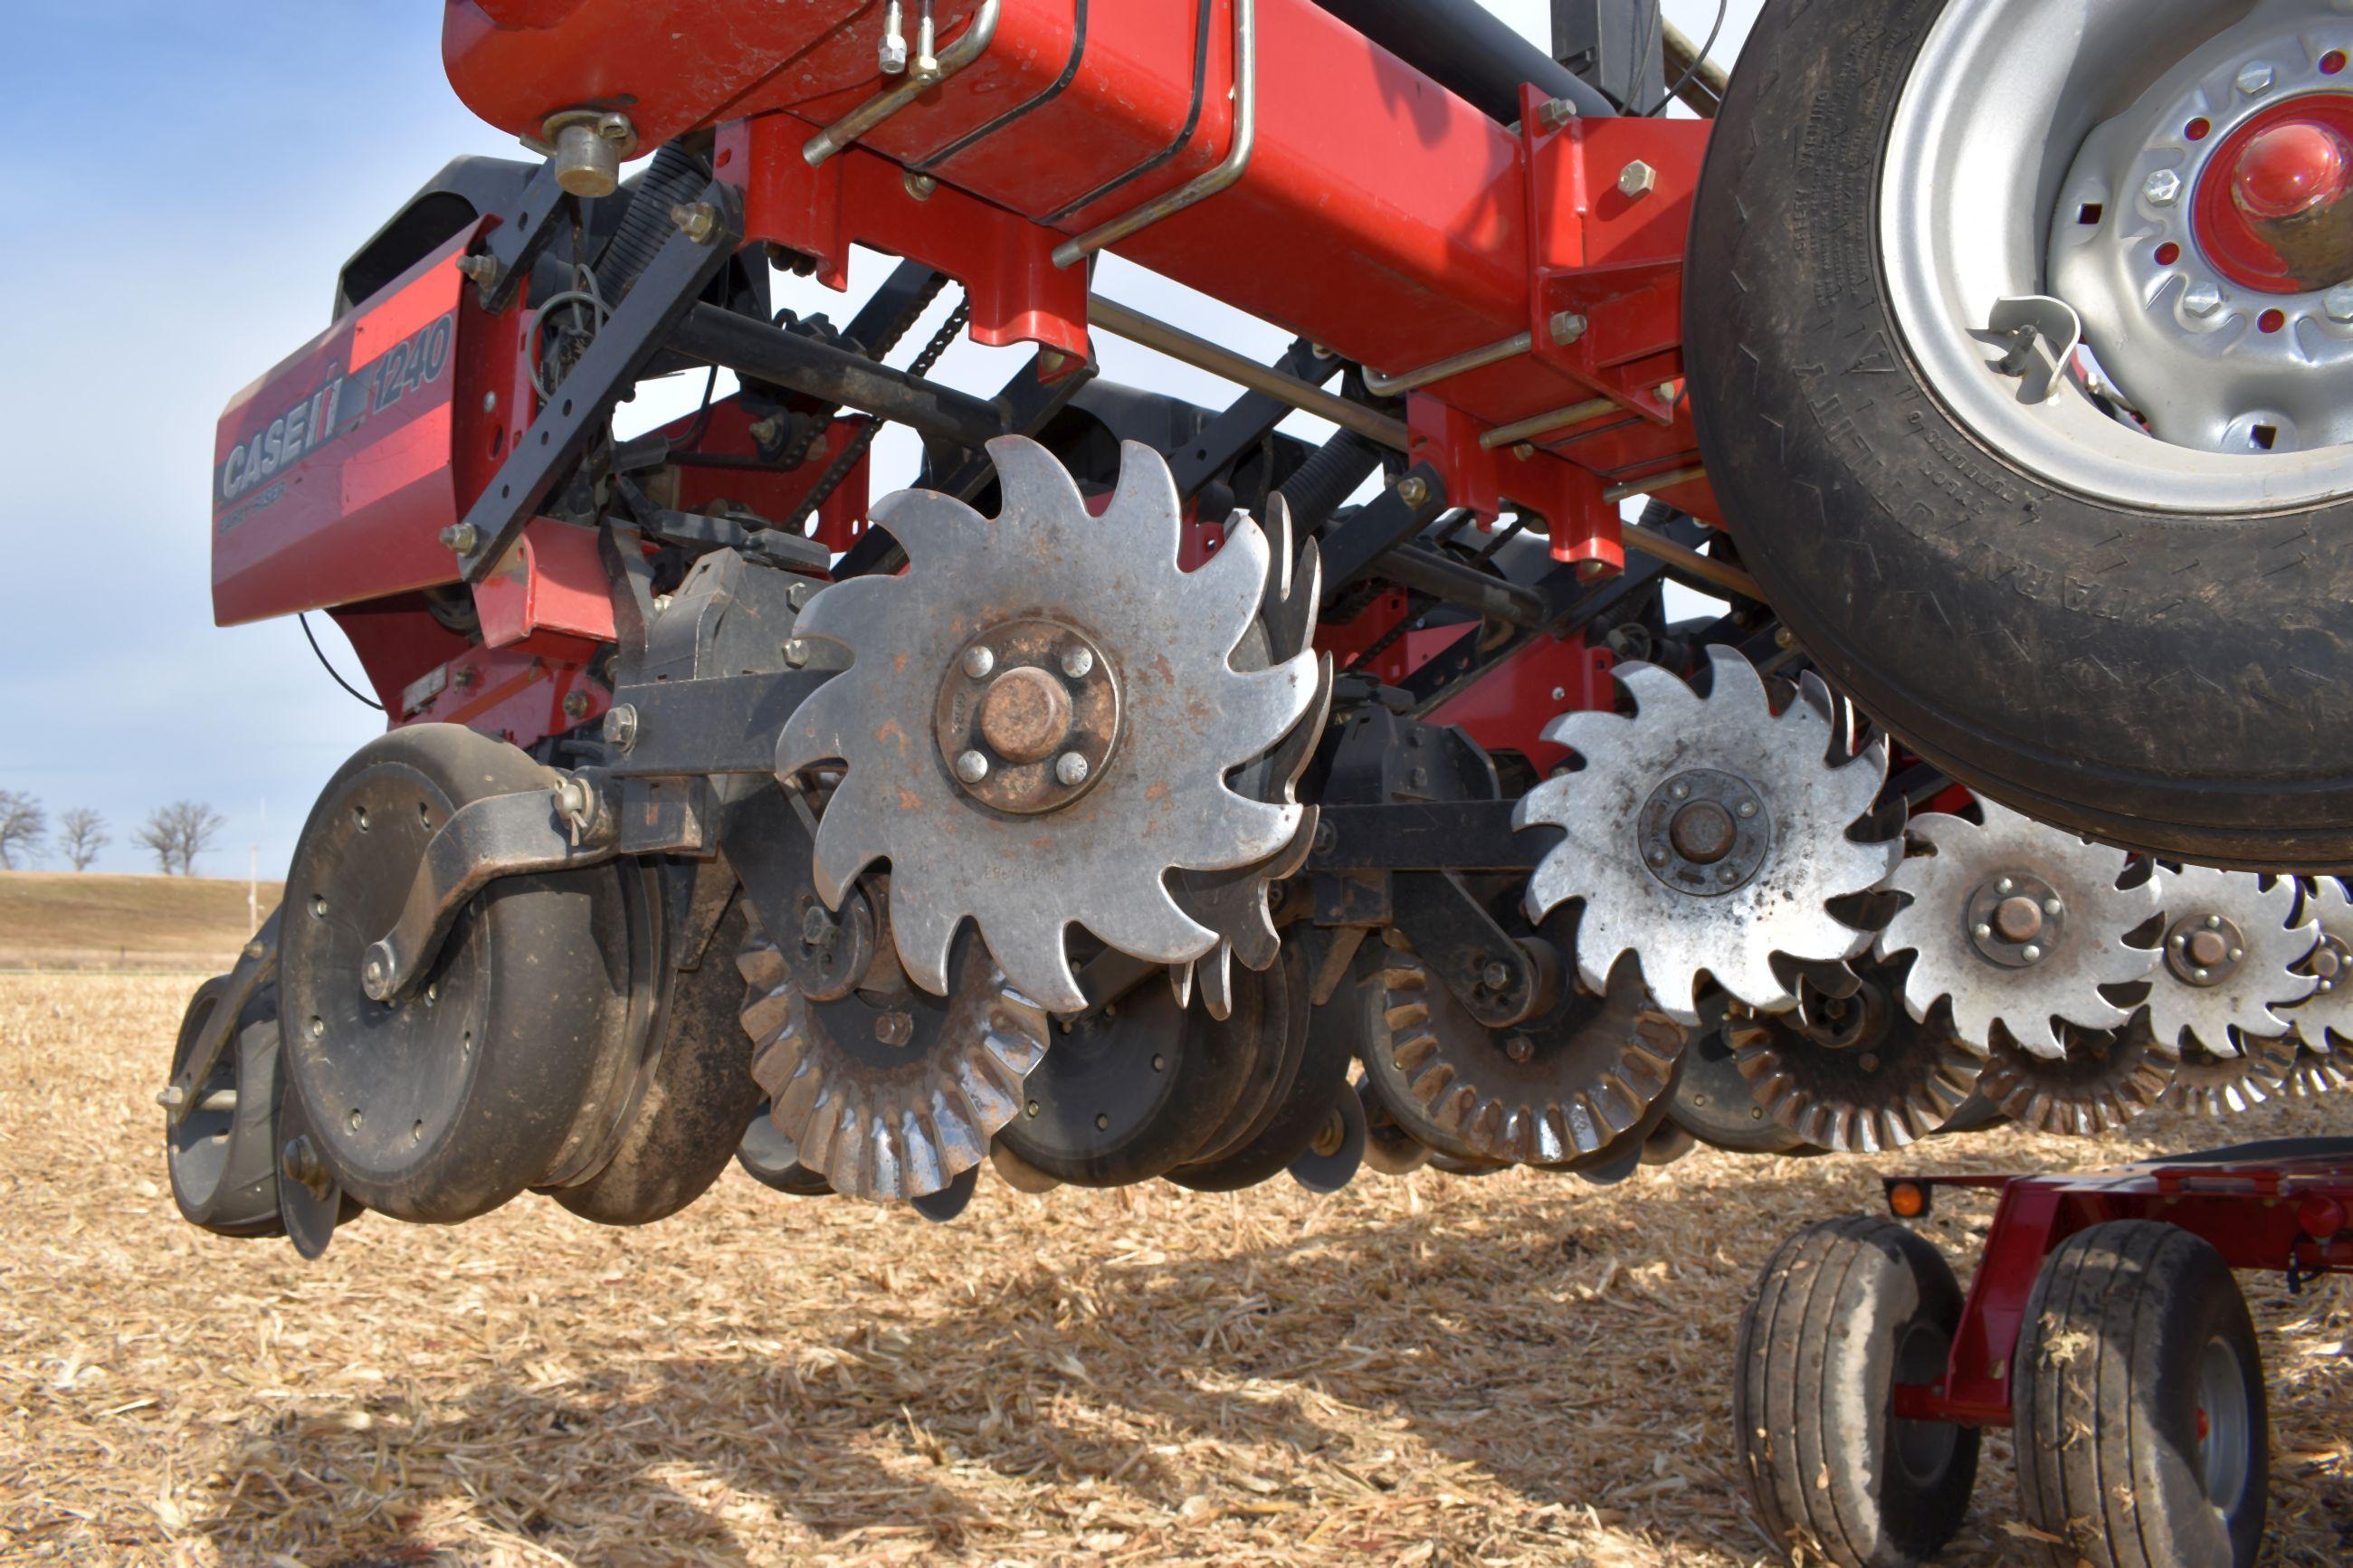 2011 Case IH 1240 Early Riser Planter, 16 Row 30” Center Pivot, Center Seed, 20/20 Air Force Precisi